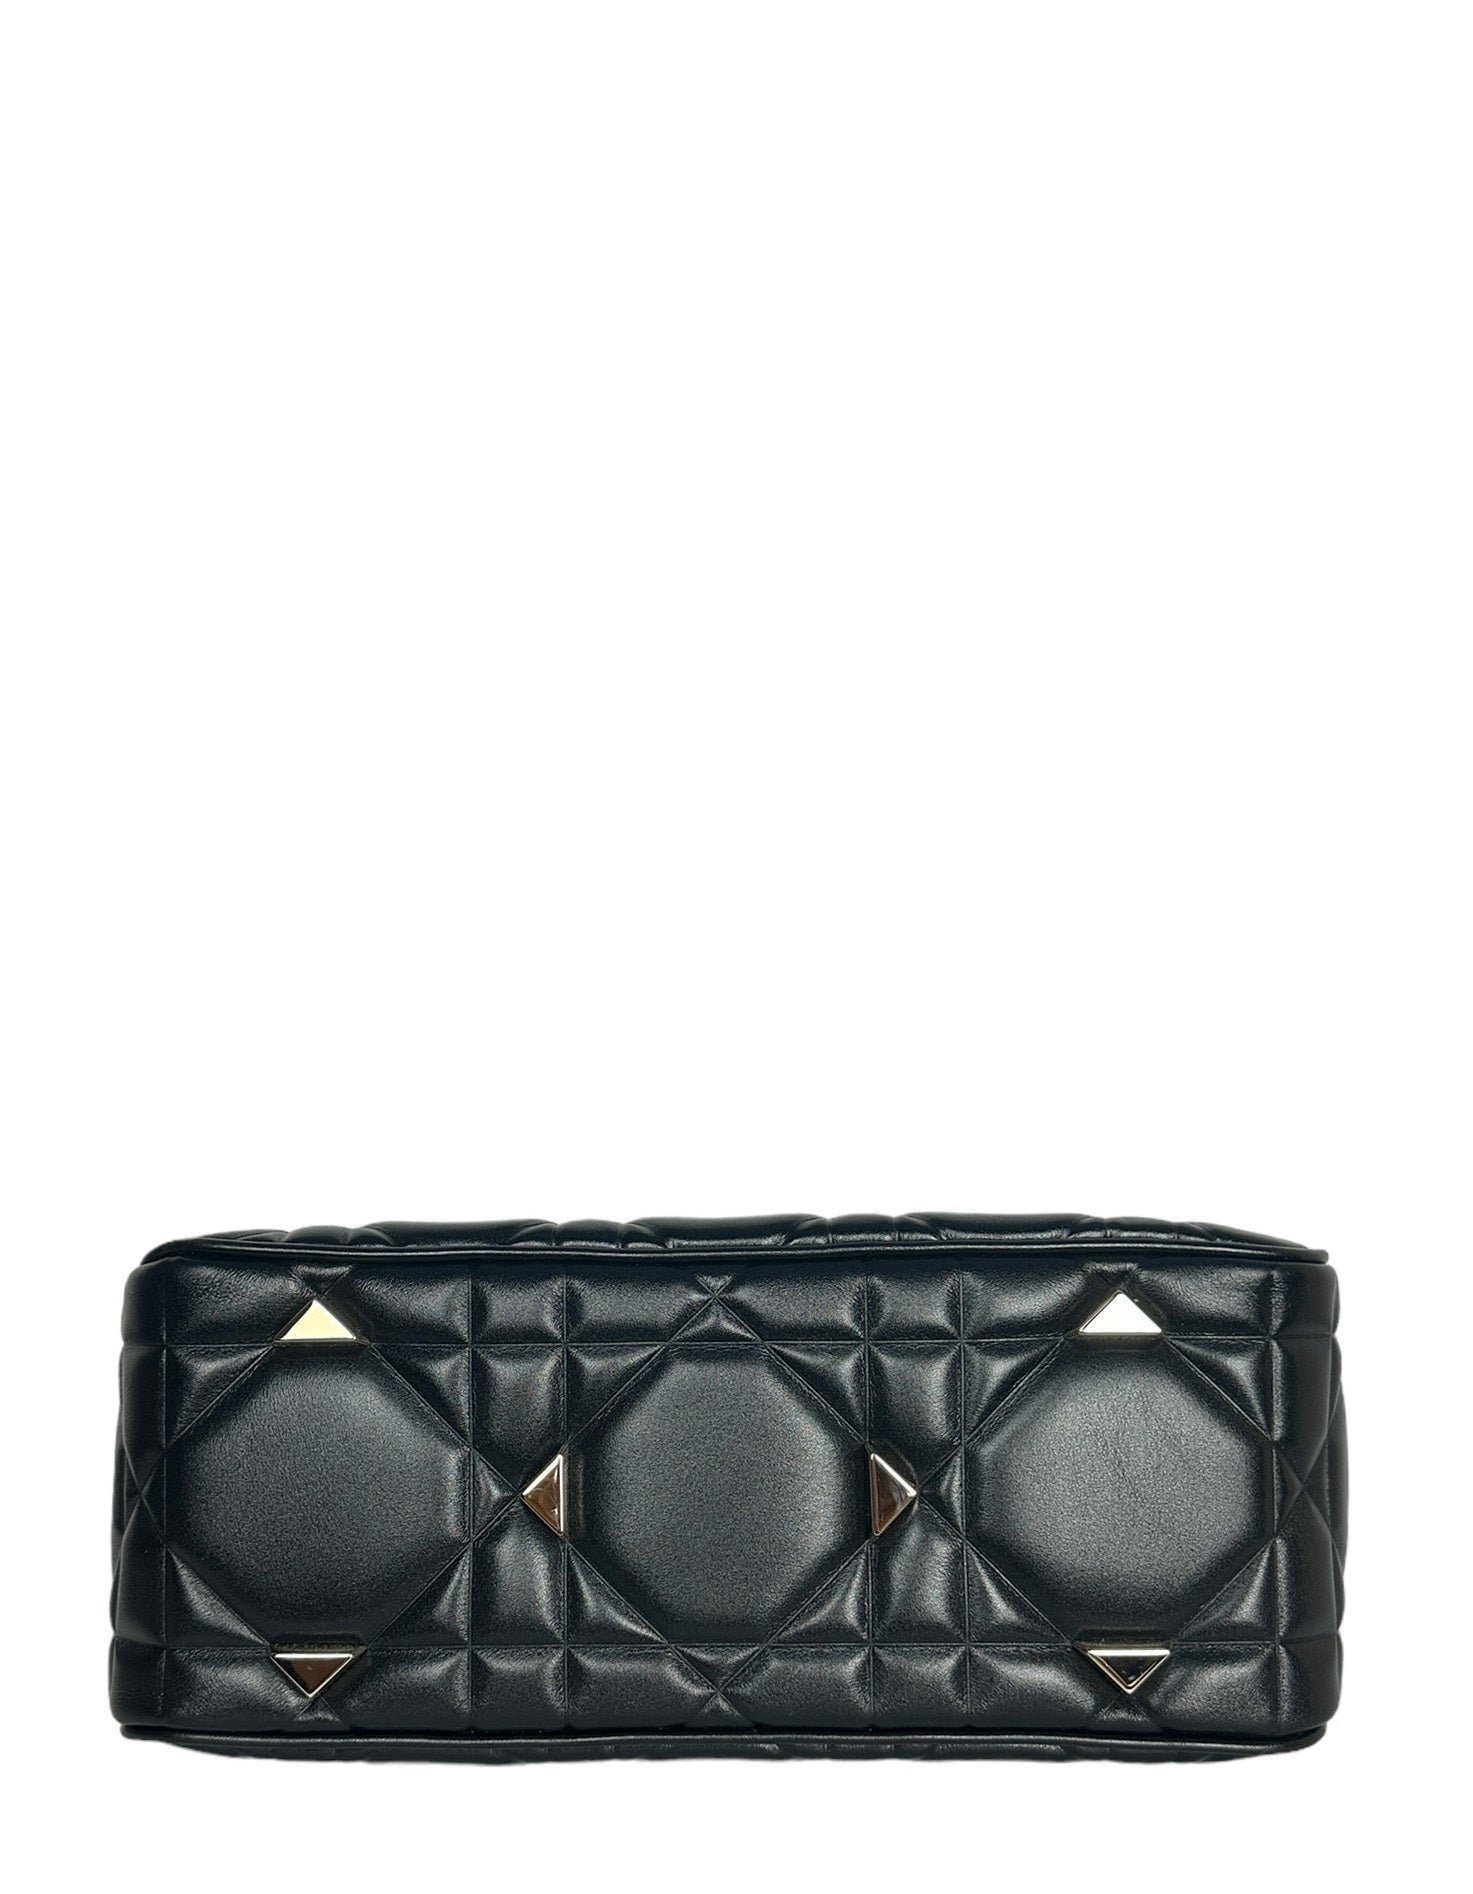 Christian Dior Black Leather Cannage Quilted The Lady 95.22 Bag